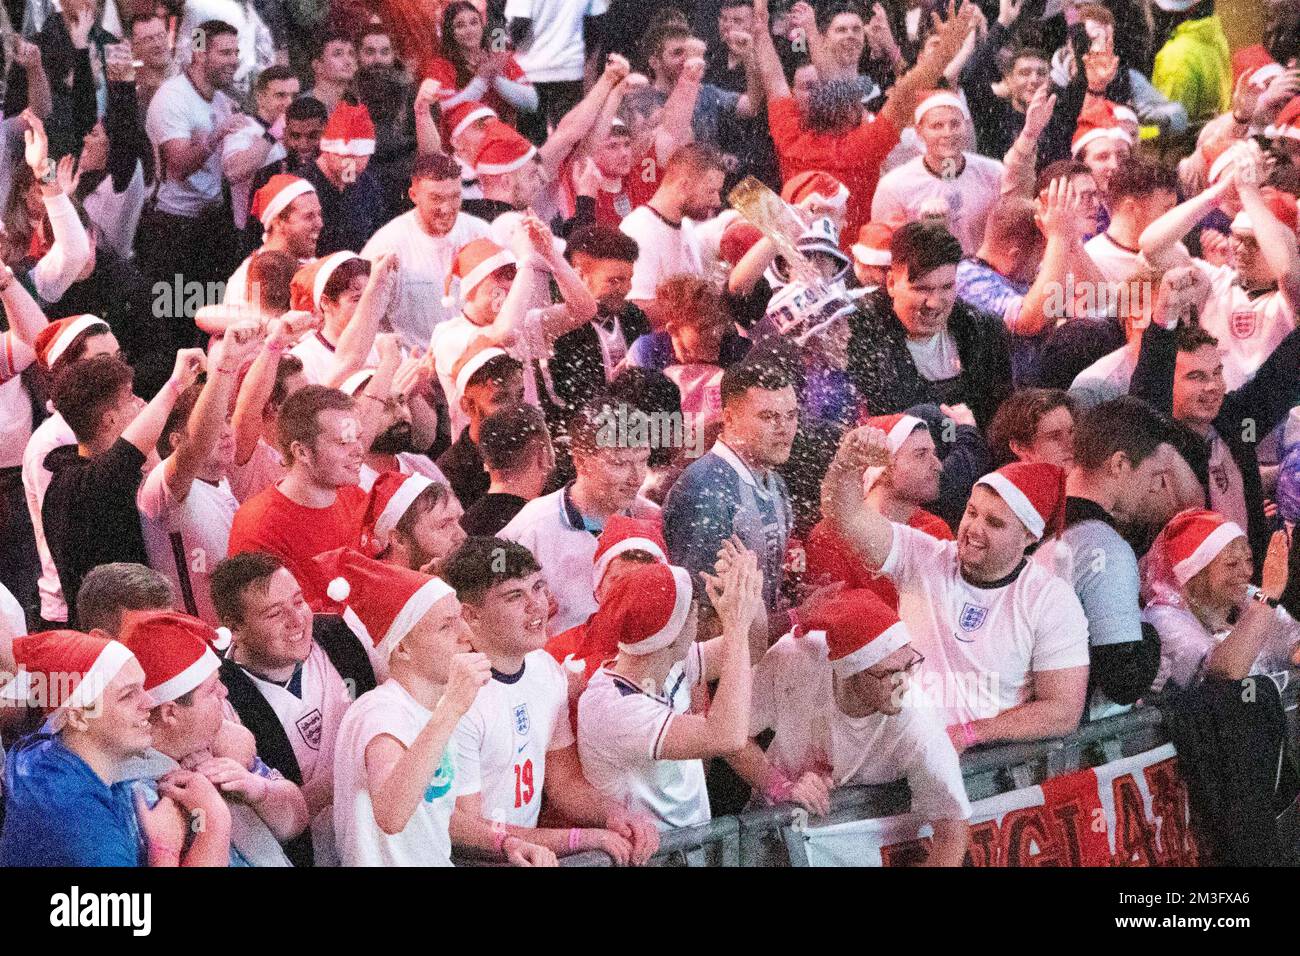 England fans throw beer in the air at Boxpark, Wembley, London, as England team scores goal against Senegal in tonight’s World Cup match.  Image shot Stock Photo